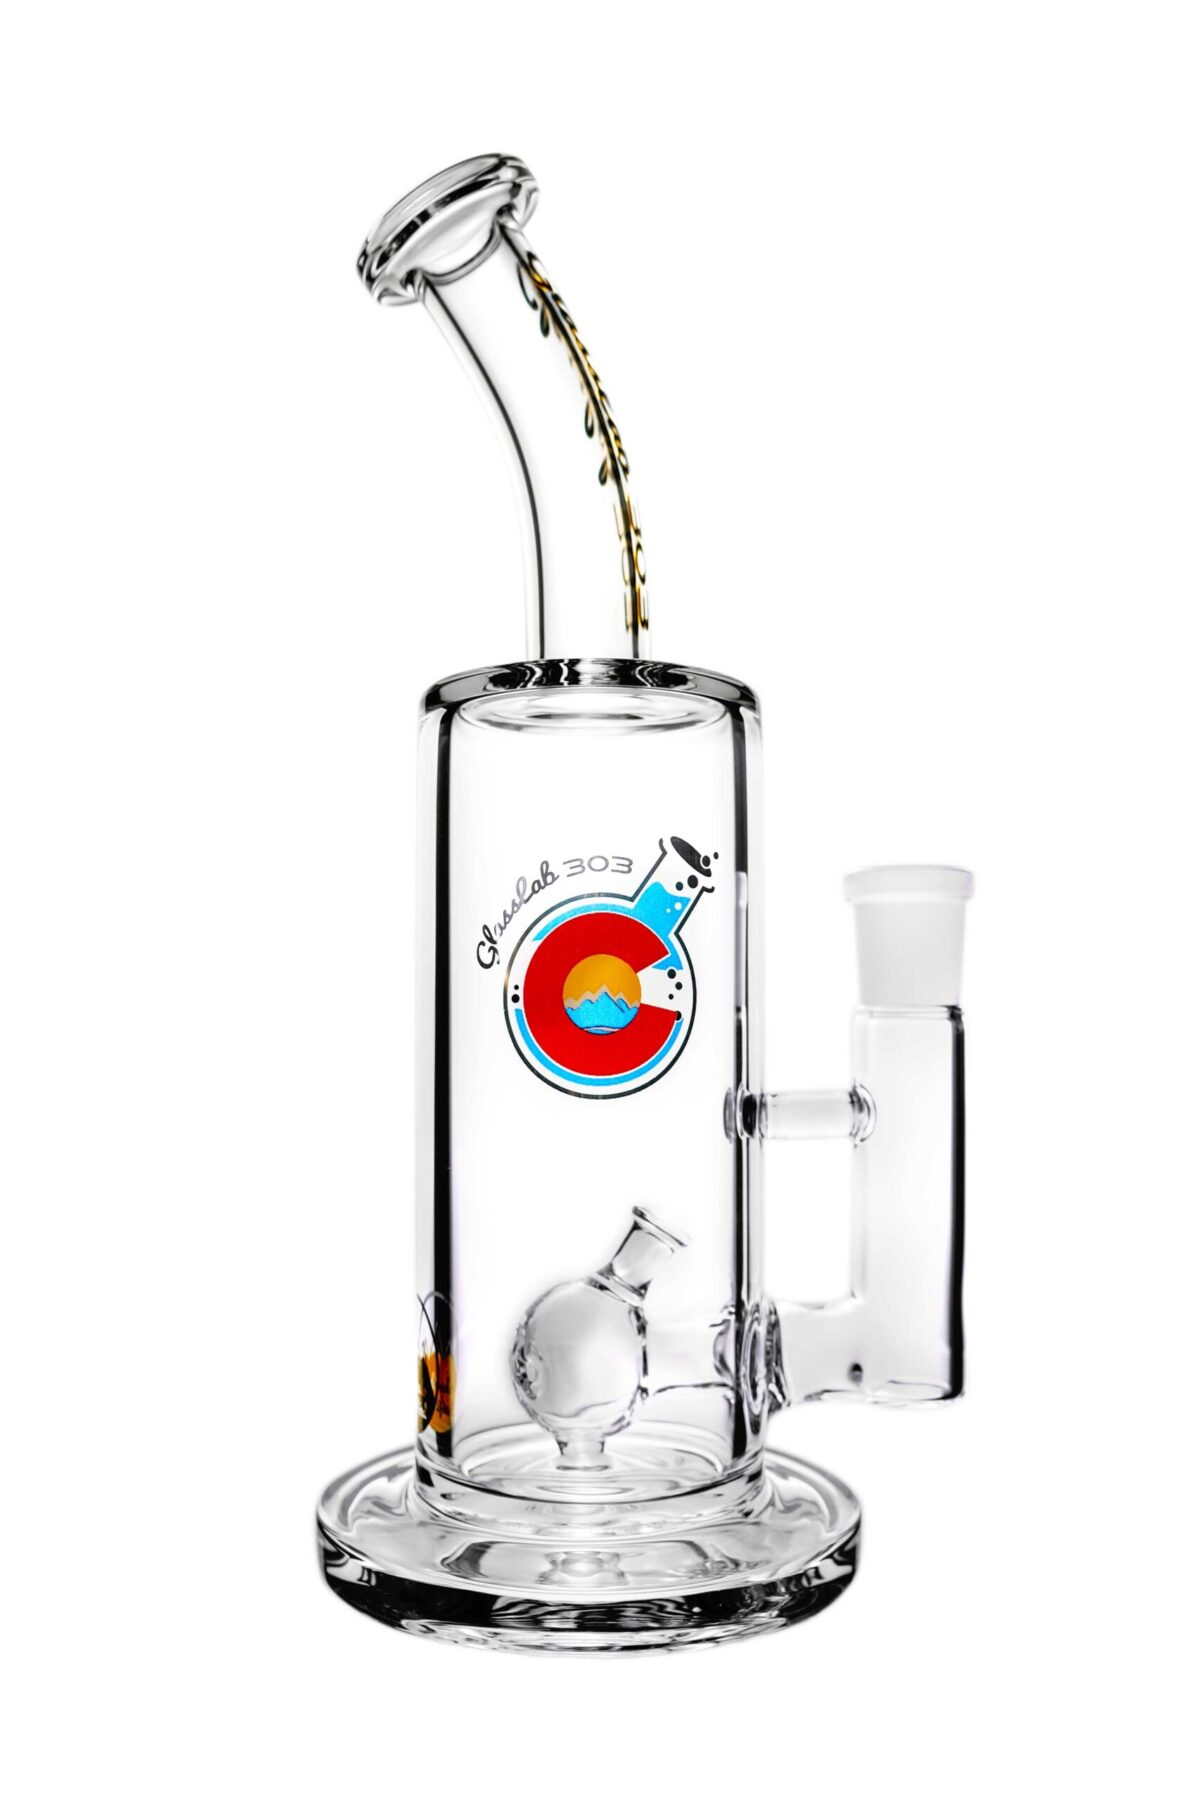 economy classic rig female banger hanger water pipe pipedup co